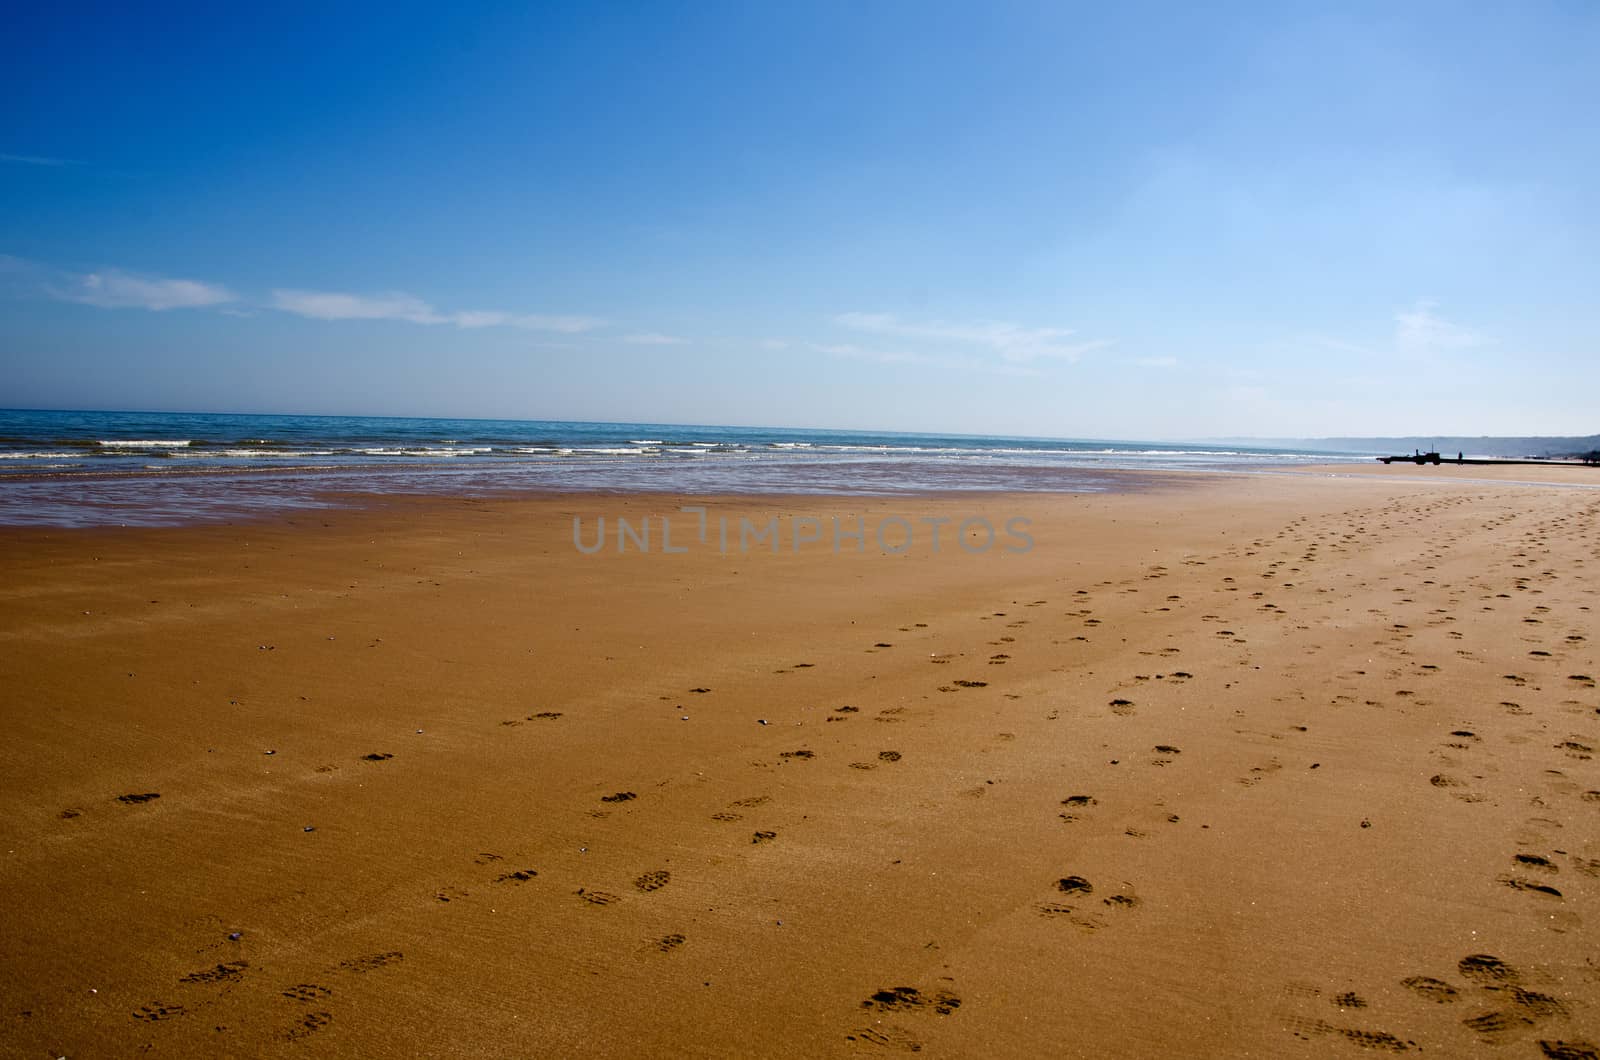 deserted beach, Normandy, France by lauria